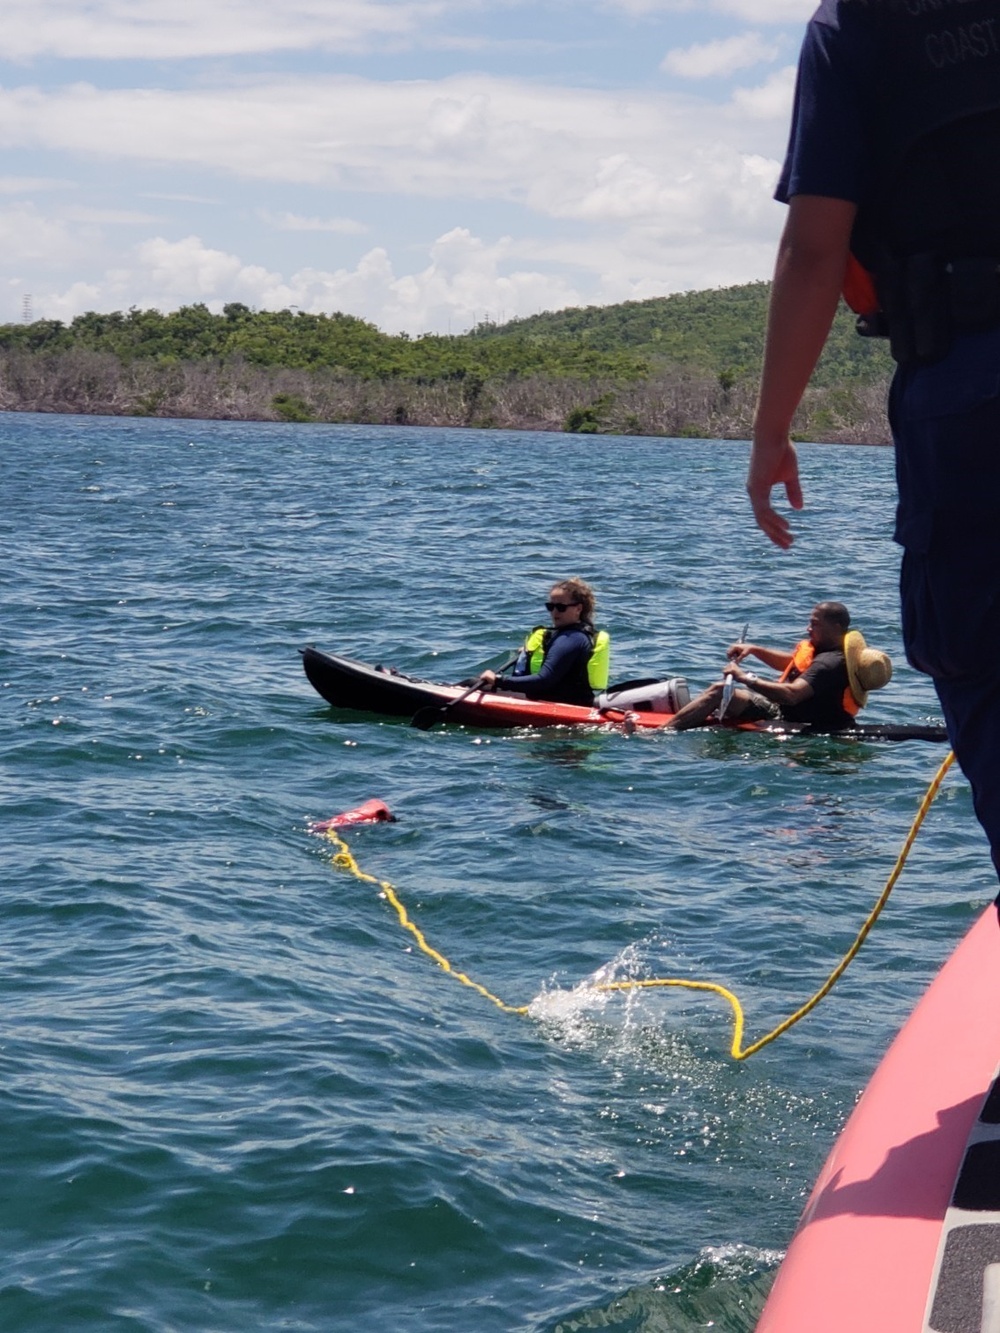 Coast Guard rescues 2 kayakers in distress just off Ceiba, Puerto Rico